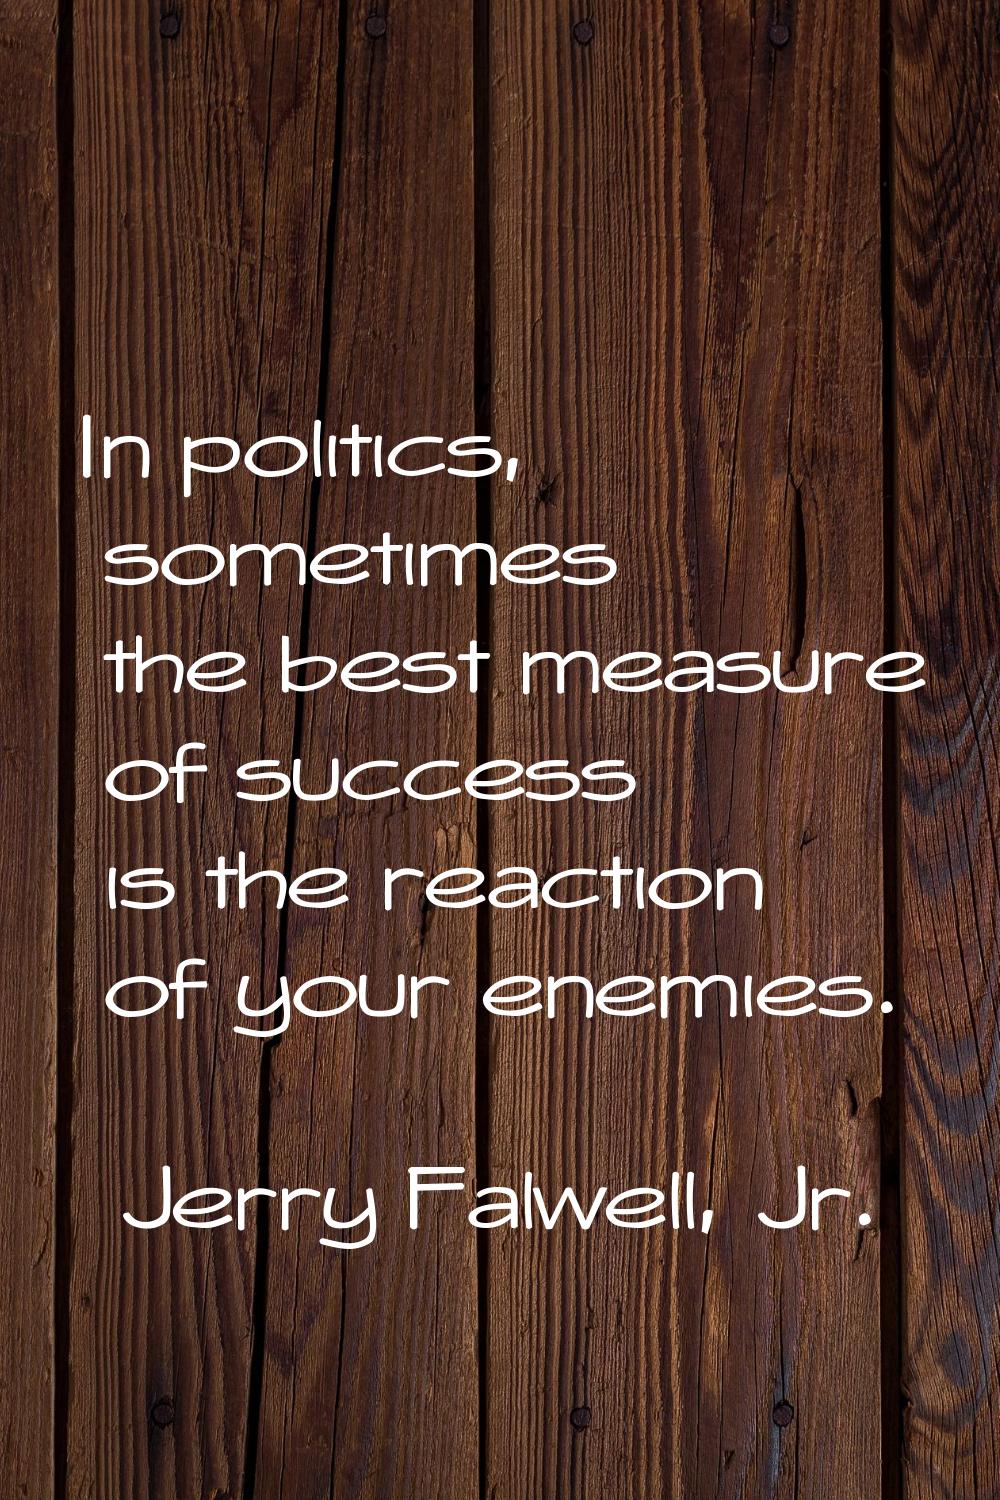 In politics, sometimes the best measure of success is the reaction of your enemies.